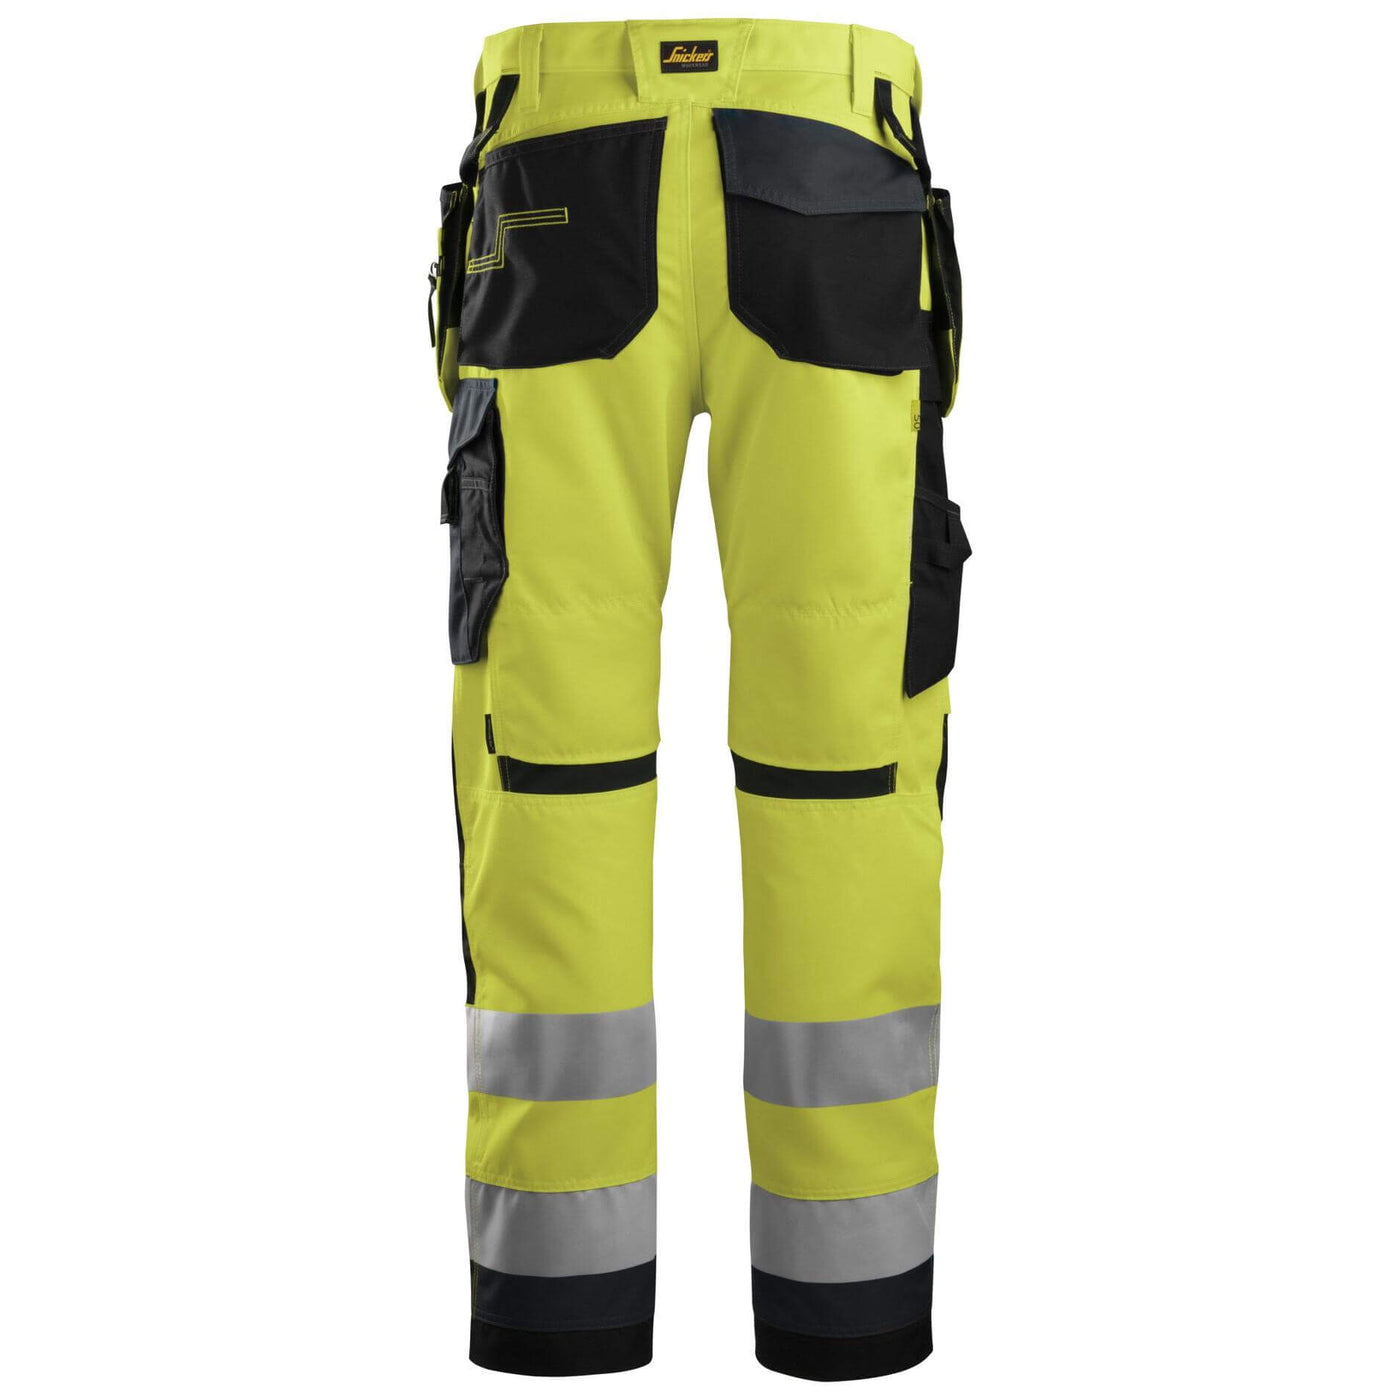 Snickers 6230 Hi Vis Work Trousers with Holster Pockets Class 2 Hi Vis Yellow Steel Grey back #colour_hi-vis-yellow-steel-grey